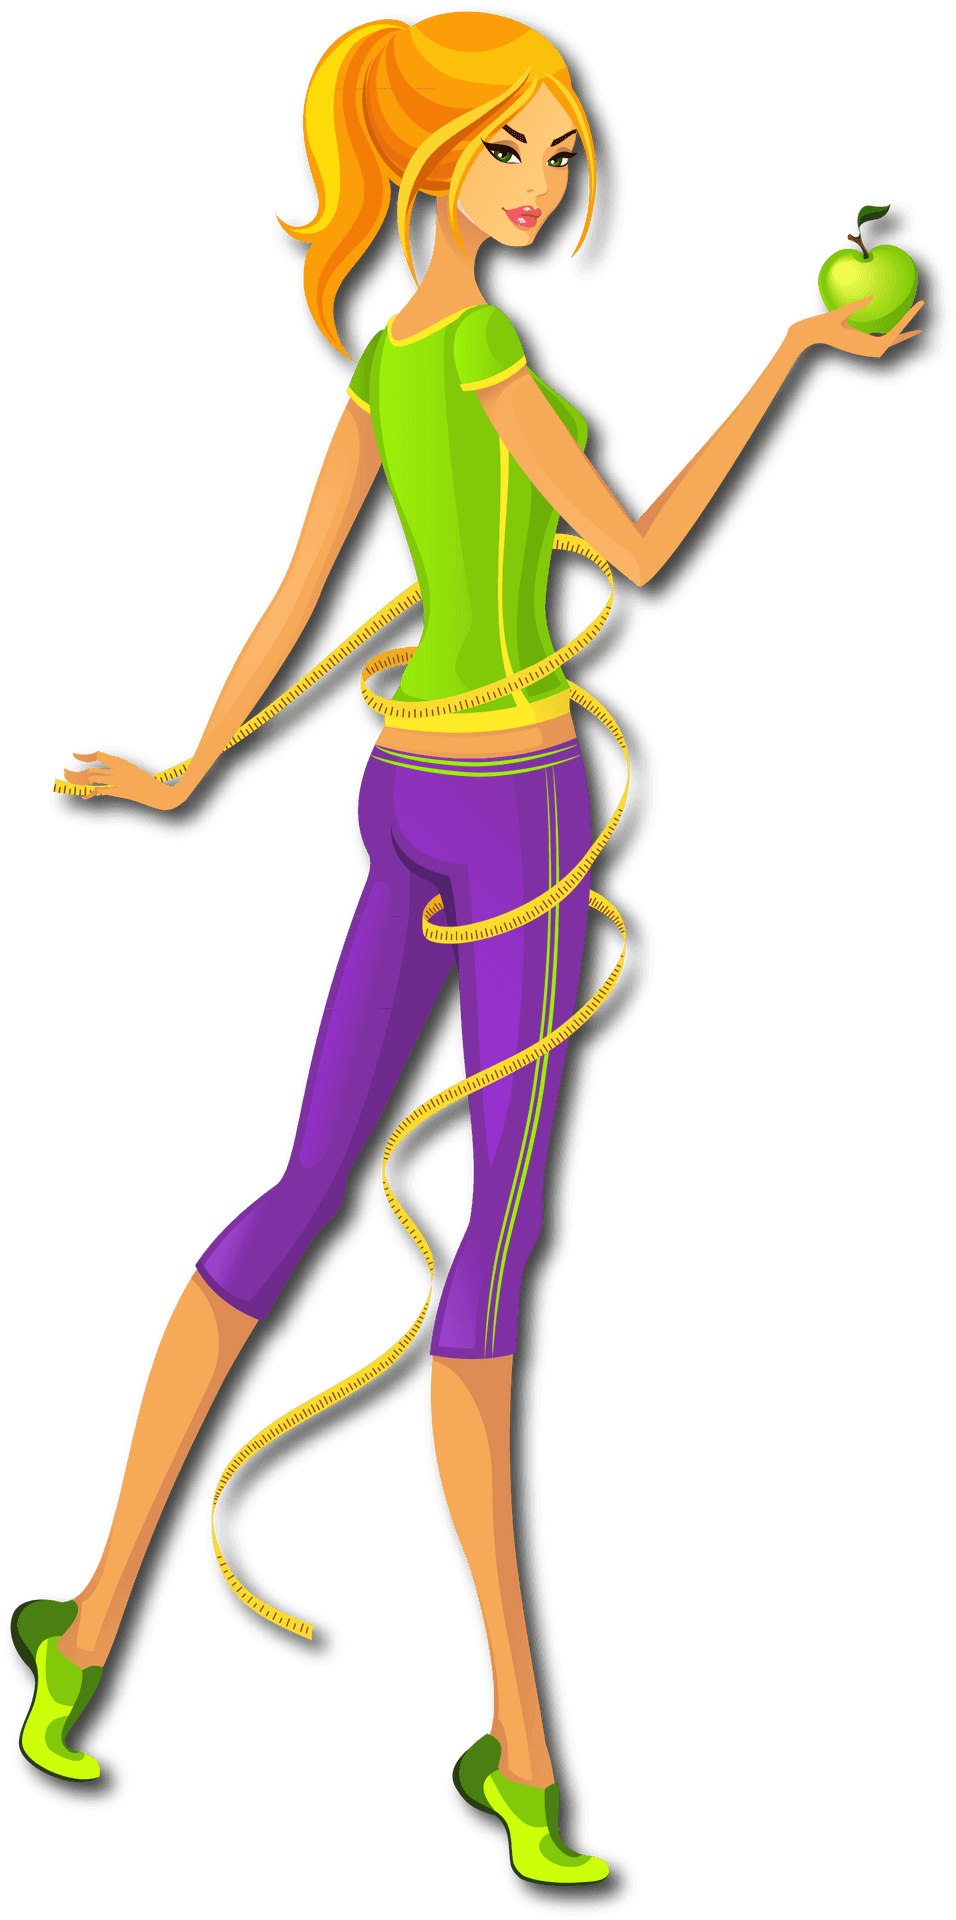 Healthy Lifestyle Animated Character PNG